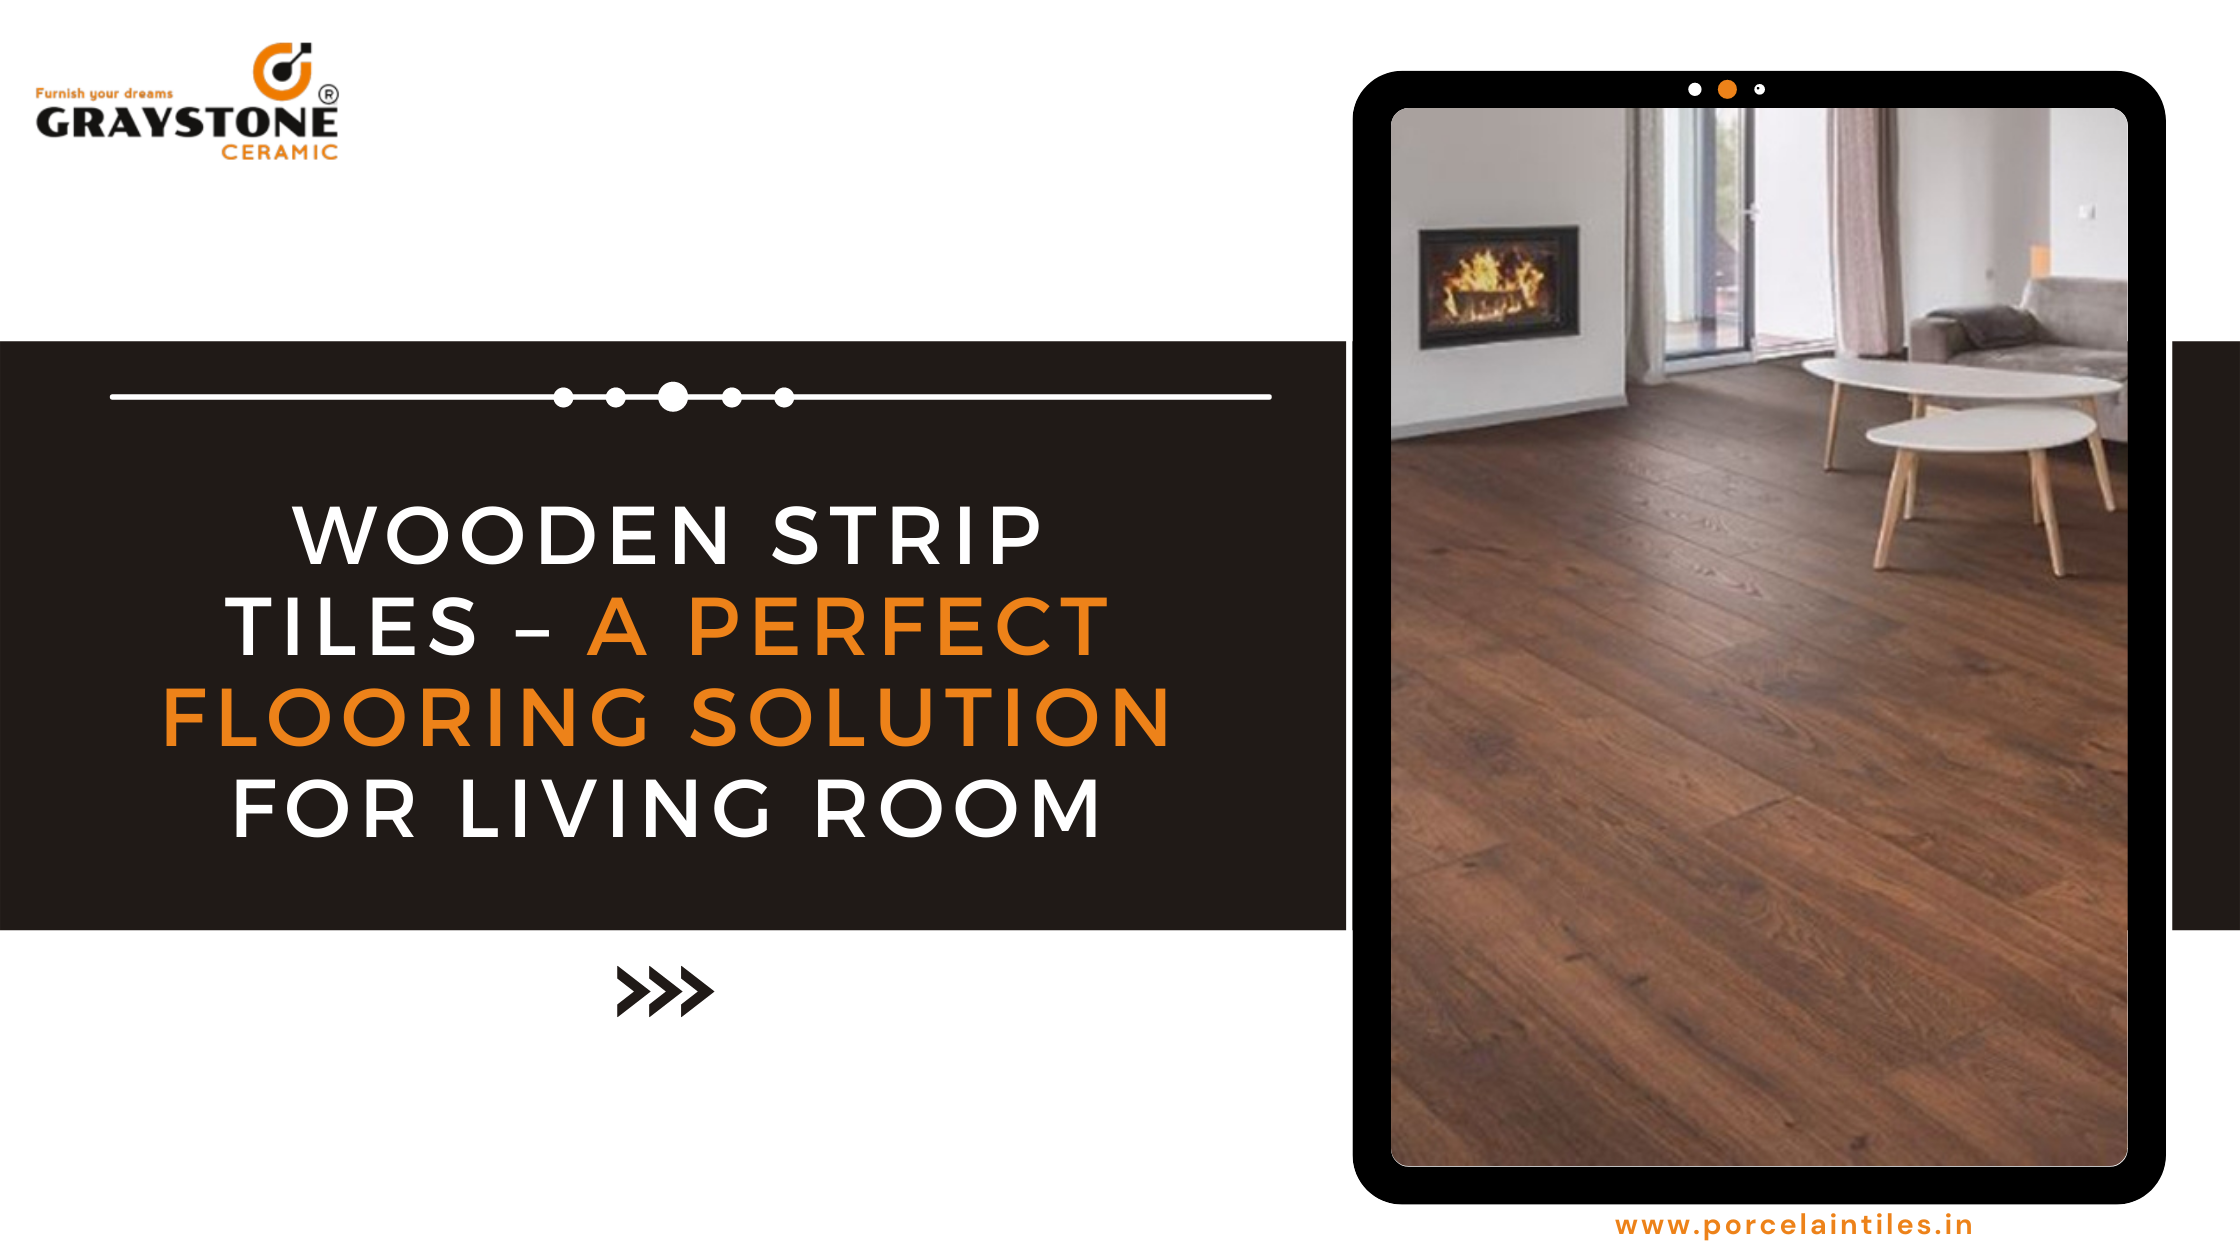 Wooden Strip Tiles – A Perfect Flooring Solution For Living Room